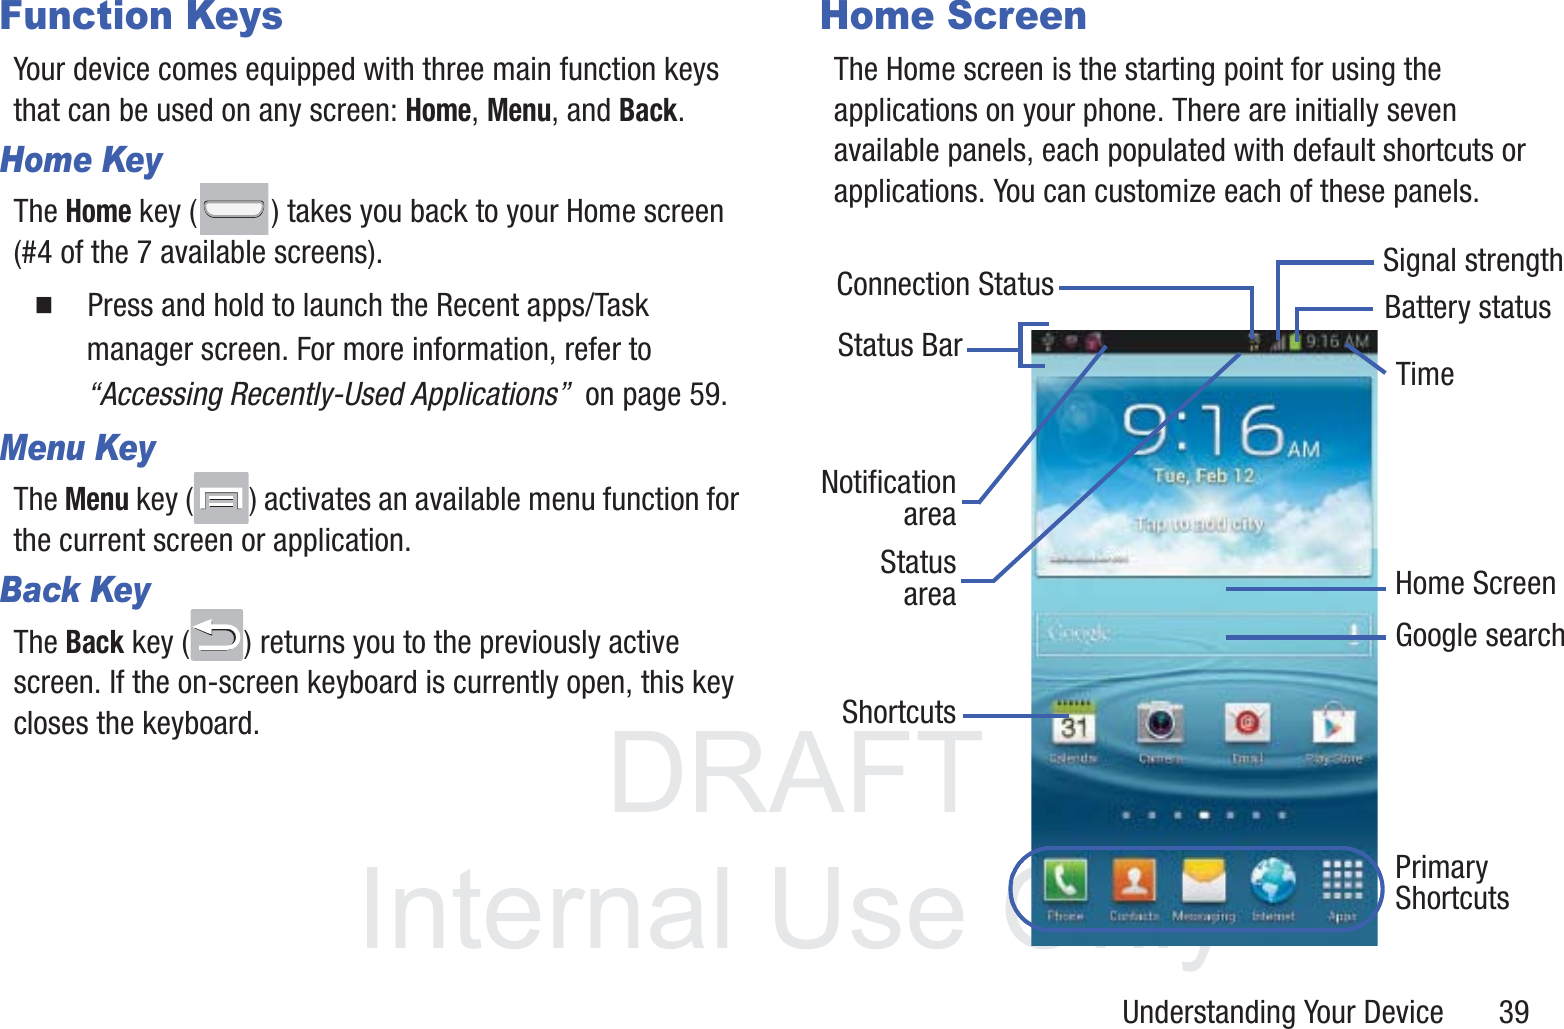 DRAFT InternalUse OnlyUnderstanding Your Device       39Function KeysYour device comes equipped with three main function keys that can be used on any screen: Home, Menu, and Back.Home KeyThe Home key ( ) takes you back to your Home screen (#4 of the 7 available screens).䡲  Press and hold to launch the Recent apps/Task manager screen. For more information, refer to “Accessing Recently-Used Applications”  on page 59.Menu KeyThe Menu key ( ) activates an available menu function for the current screen or application. Back KeyThe Back key ( ) returns you to the previously active screen. If the on-screen keyboard is currently open, this key closes the keyboard.Home ScreenThe Home screen is the starting point for using the applications on your phone. There are initially seven available panels, each populated with default shortcuts or applications. You can customize each of these panels. Google searchHome ScreenPrimaryNotificationShortcutsStatus BarareaStatusareaShortcutsBattery statusConnection StatusTimeSignal strength